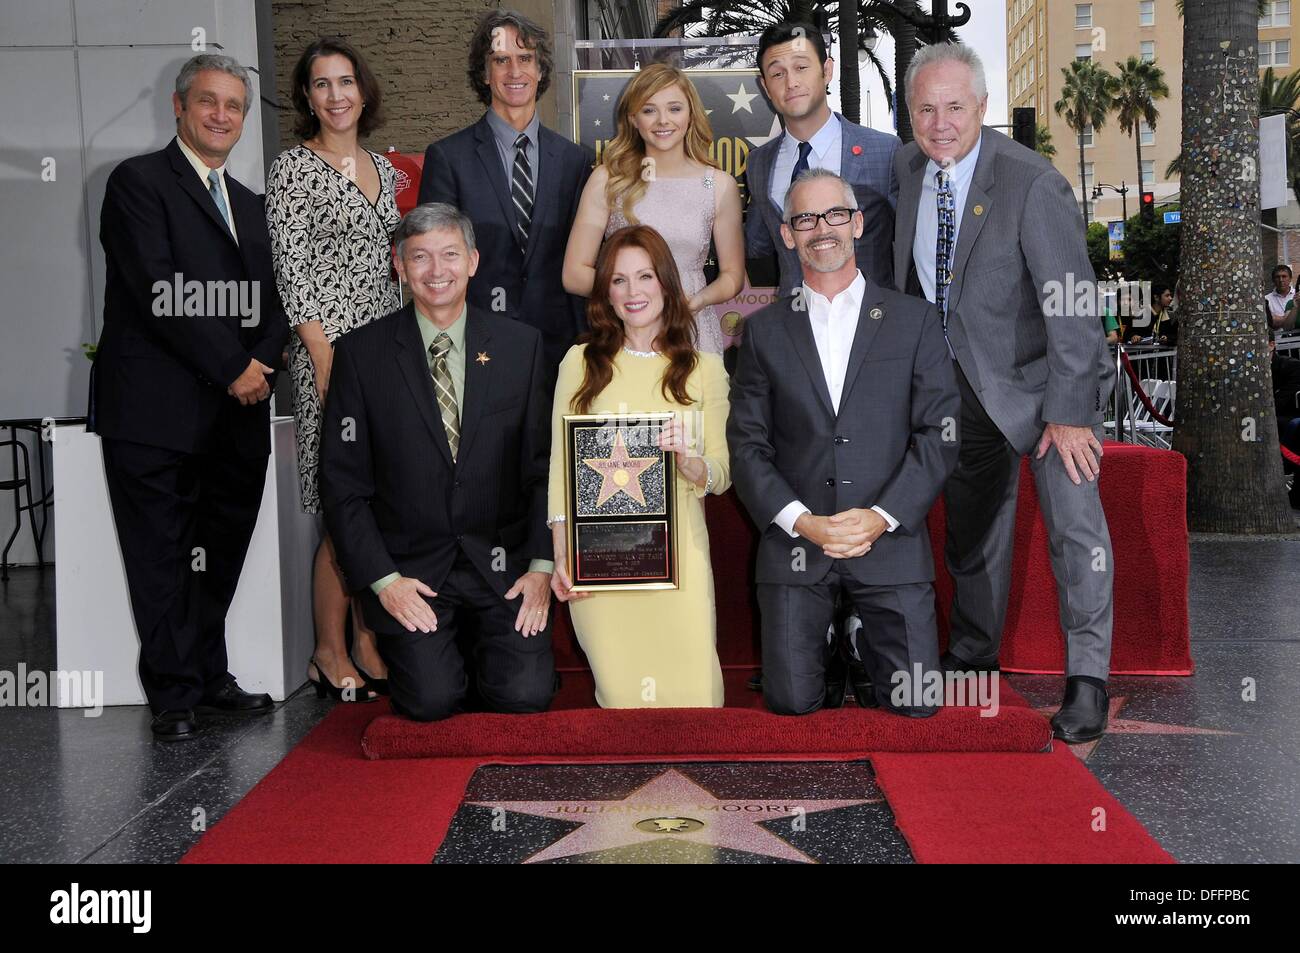 Los Angeles, CA. 3rd Oct, 2013. David Green, Heather Cochran, Leron Gubler, Jay Roach, Julianne Moore, Chloe Grace Moretz, Joseph Gordon Levett, Mitch O'Farrell, Tom LaBong at the induction ceremony for Star on the Hollywood Walk of Fame for Julianne Moore, Hollywood Boulevard, Los Angeles, CA October 3, 2013. © Michael Germana/Everett Collection/Alamy Live News Stock Photo